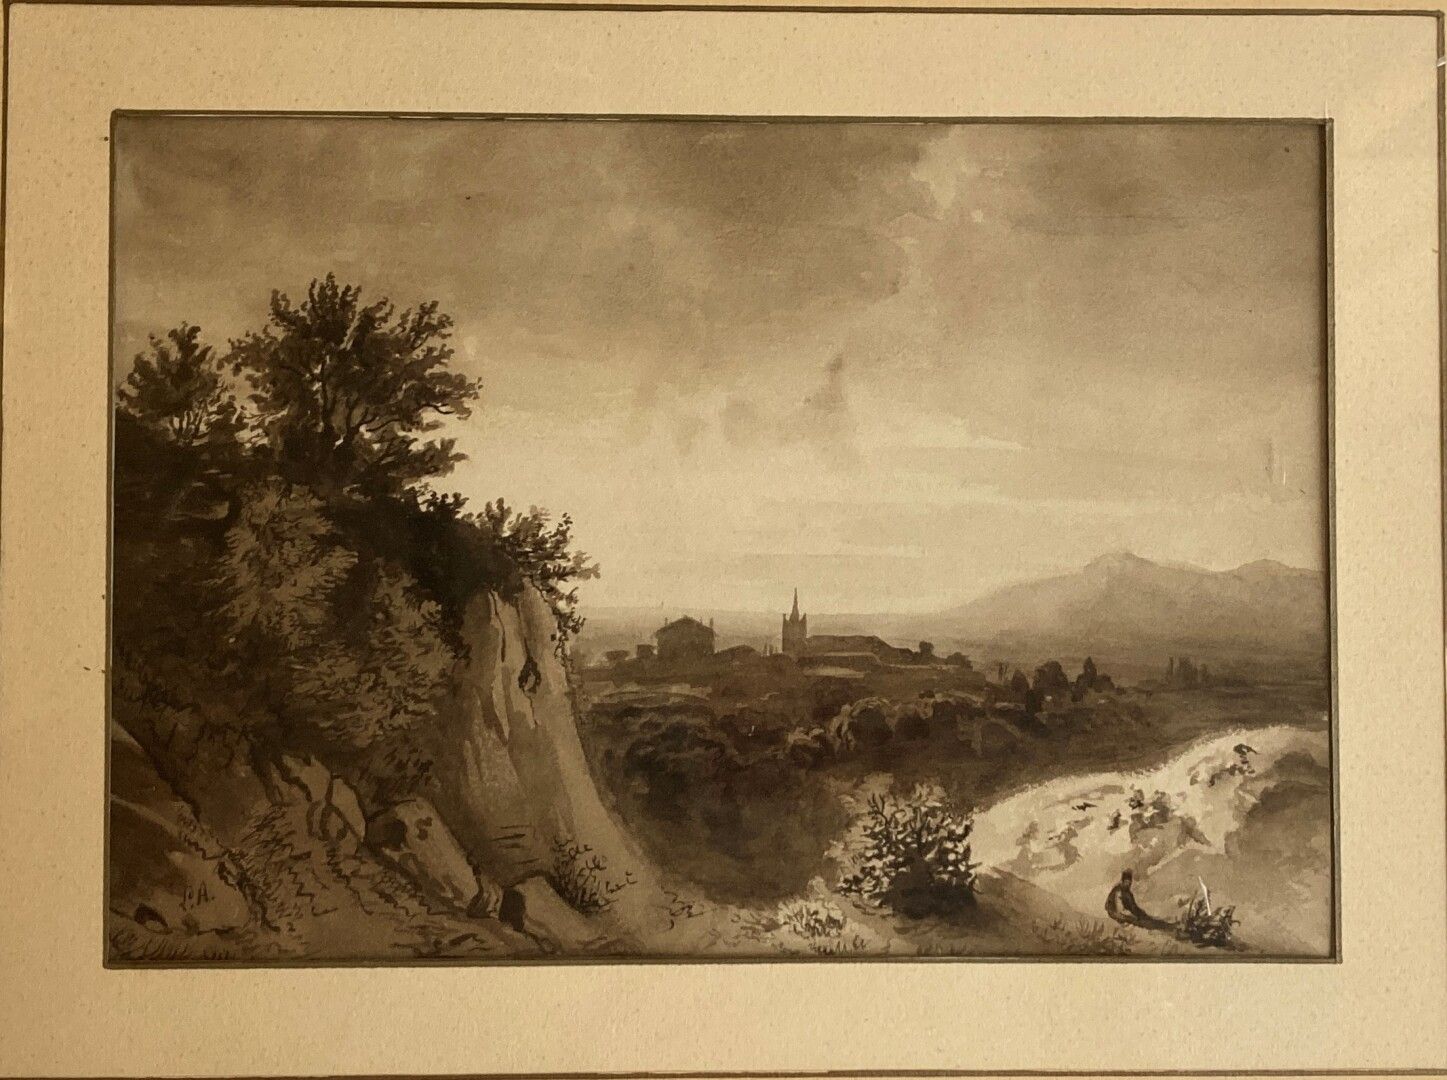 Null FRENCH SCHOOL circa 1840

Rocky landscape, a village in the distance

Black&hellip;